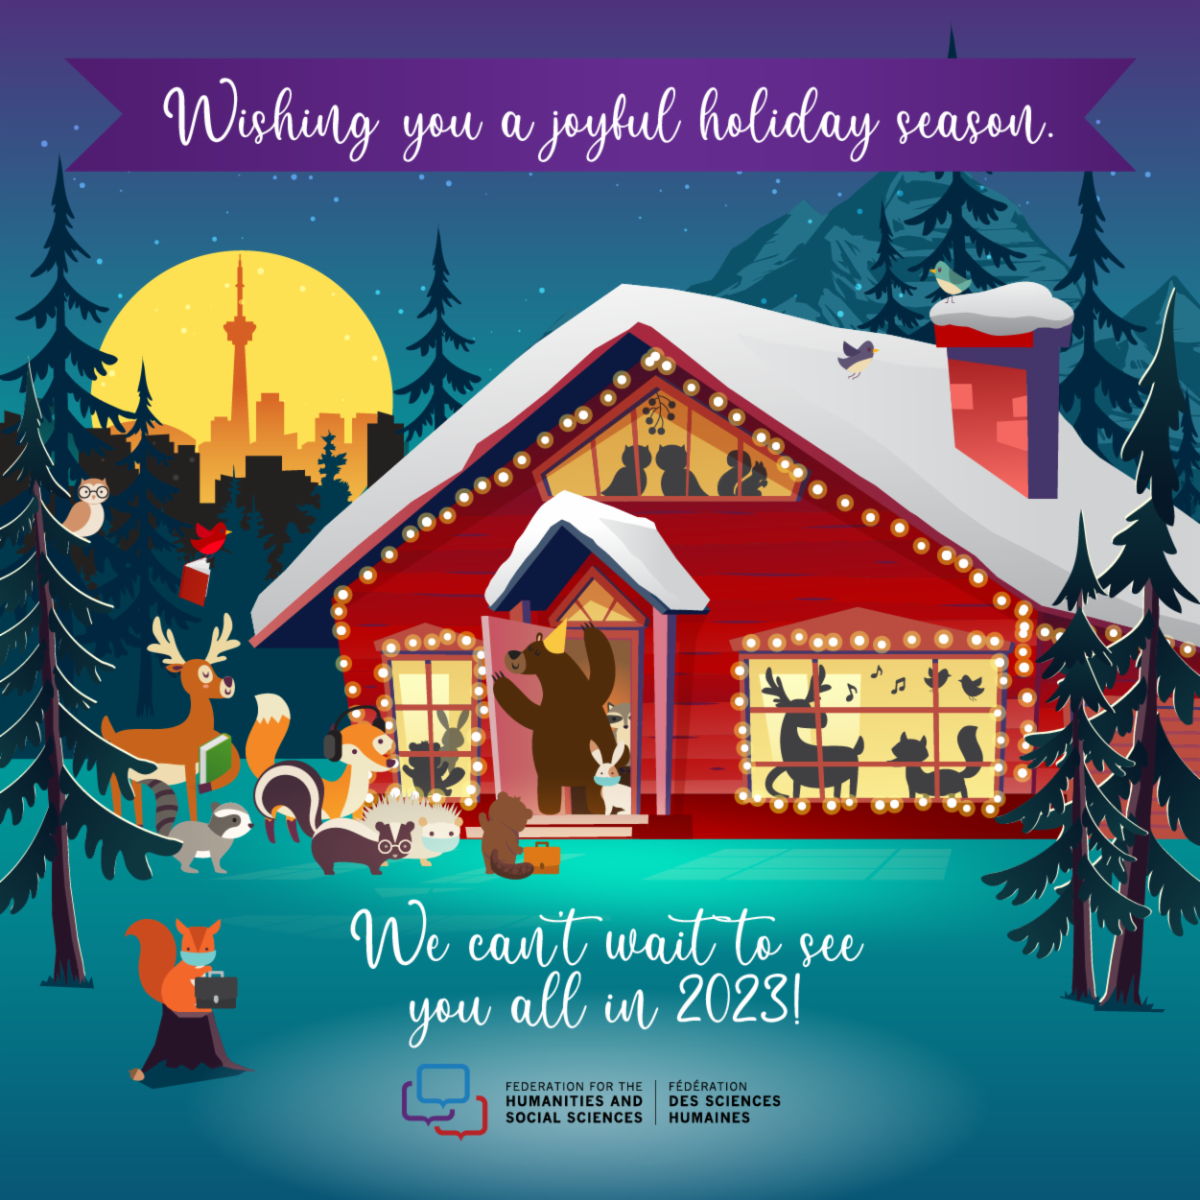 Wishing you a joyful holiday season, we can't wait to see you all in 2023! House party in the forest with animals inside others at the door welcoming guests. Some are wearing glasses, have suitcases and headphones on and a mask. CN tower in the back.